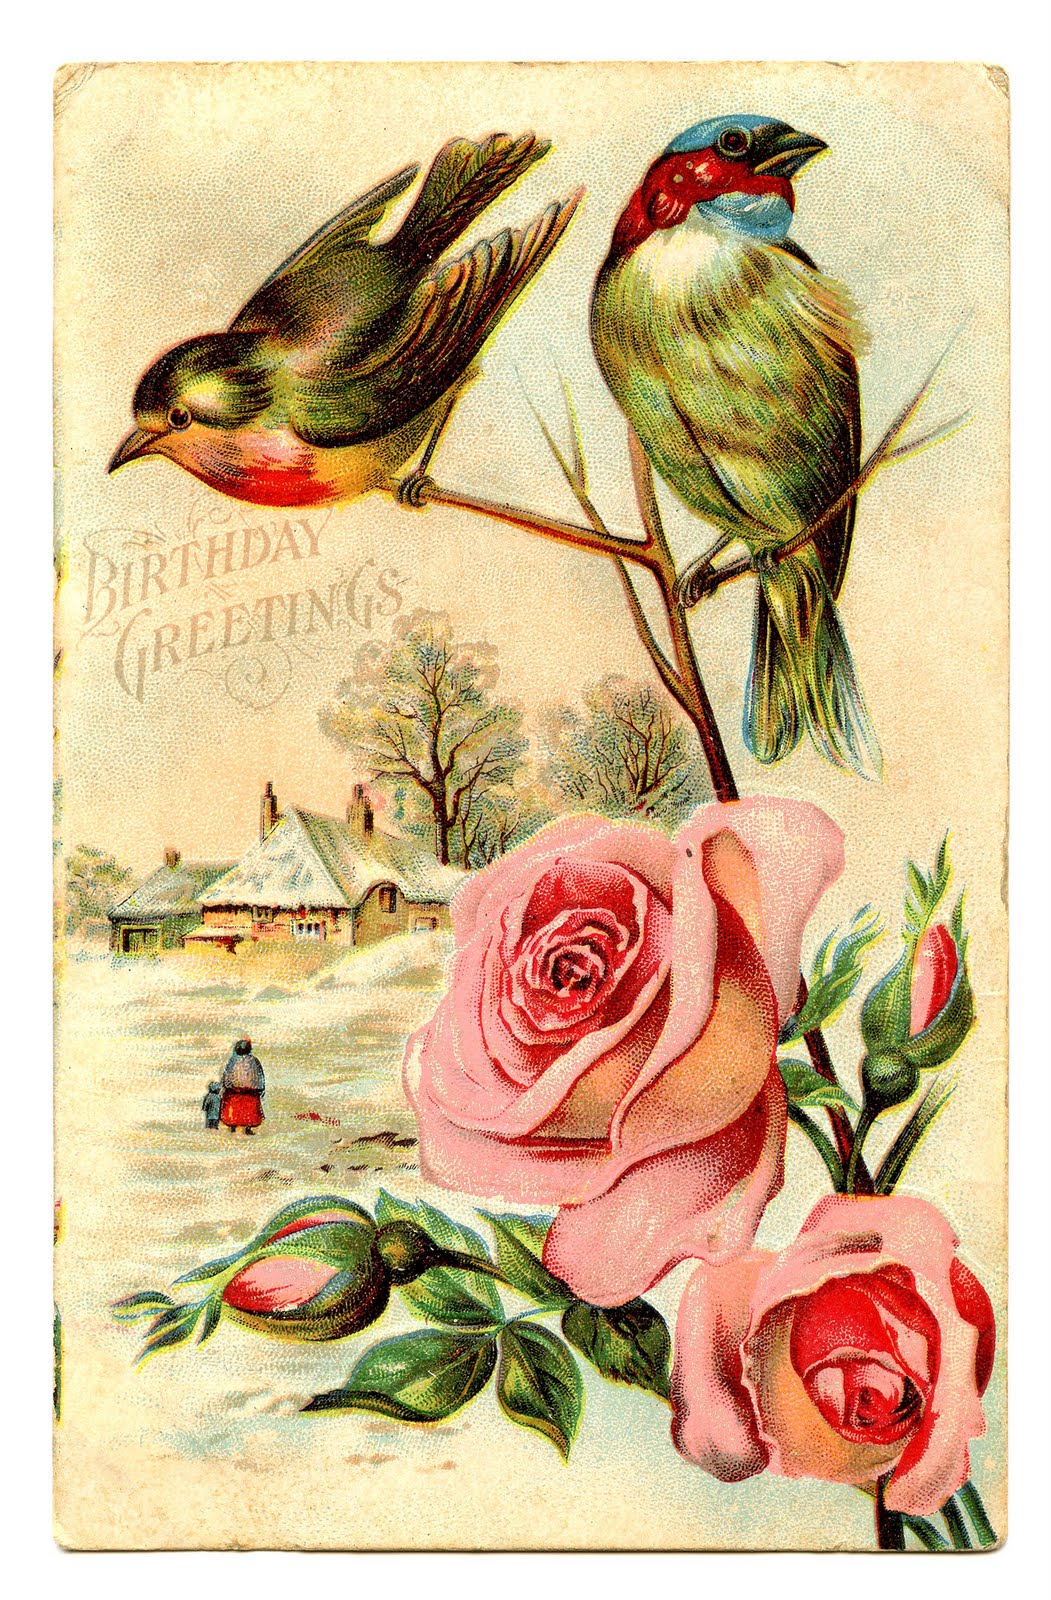 free clipart of vintage birds - photo #35